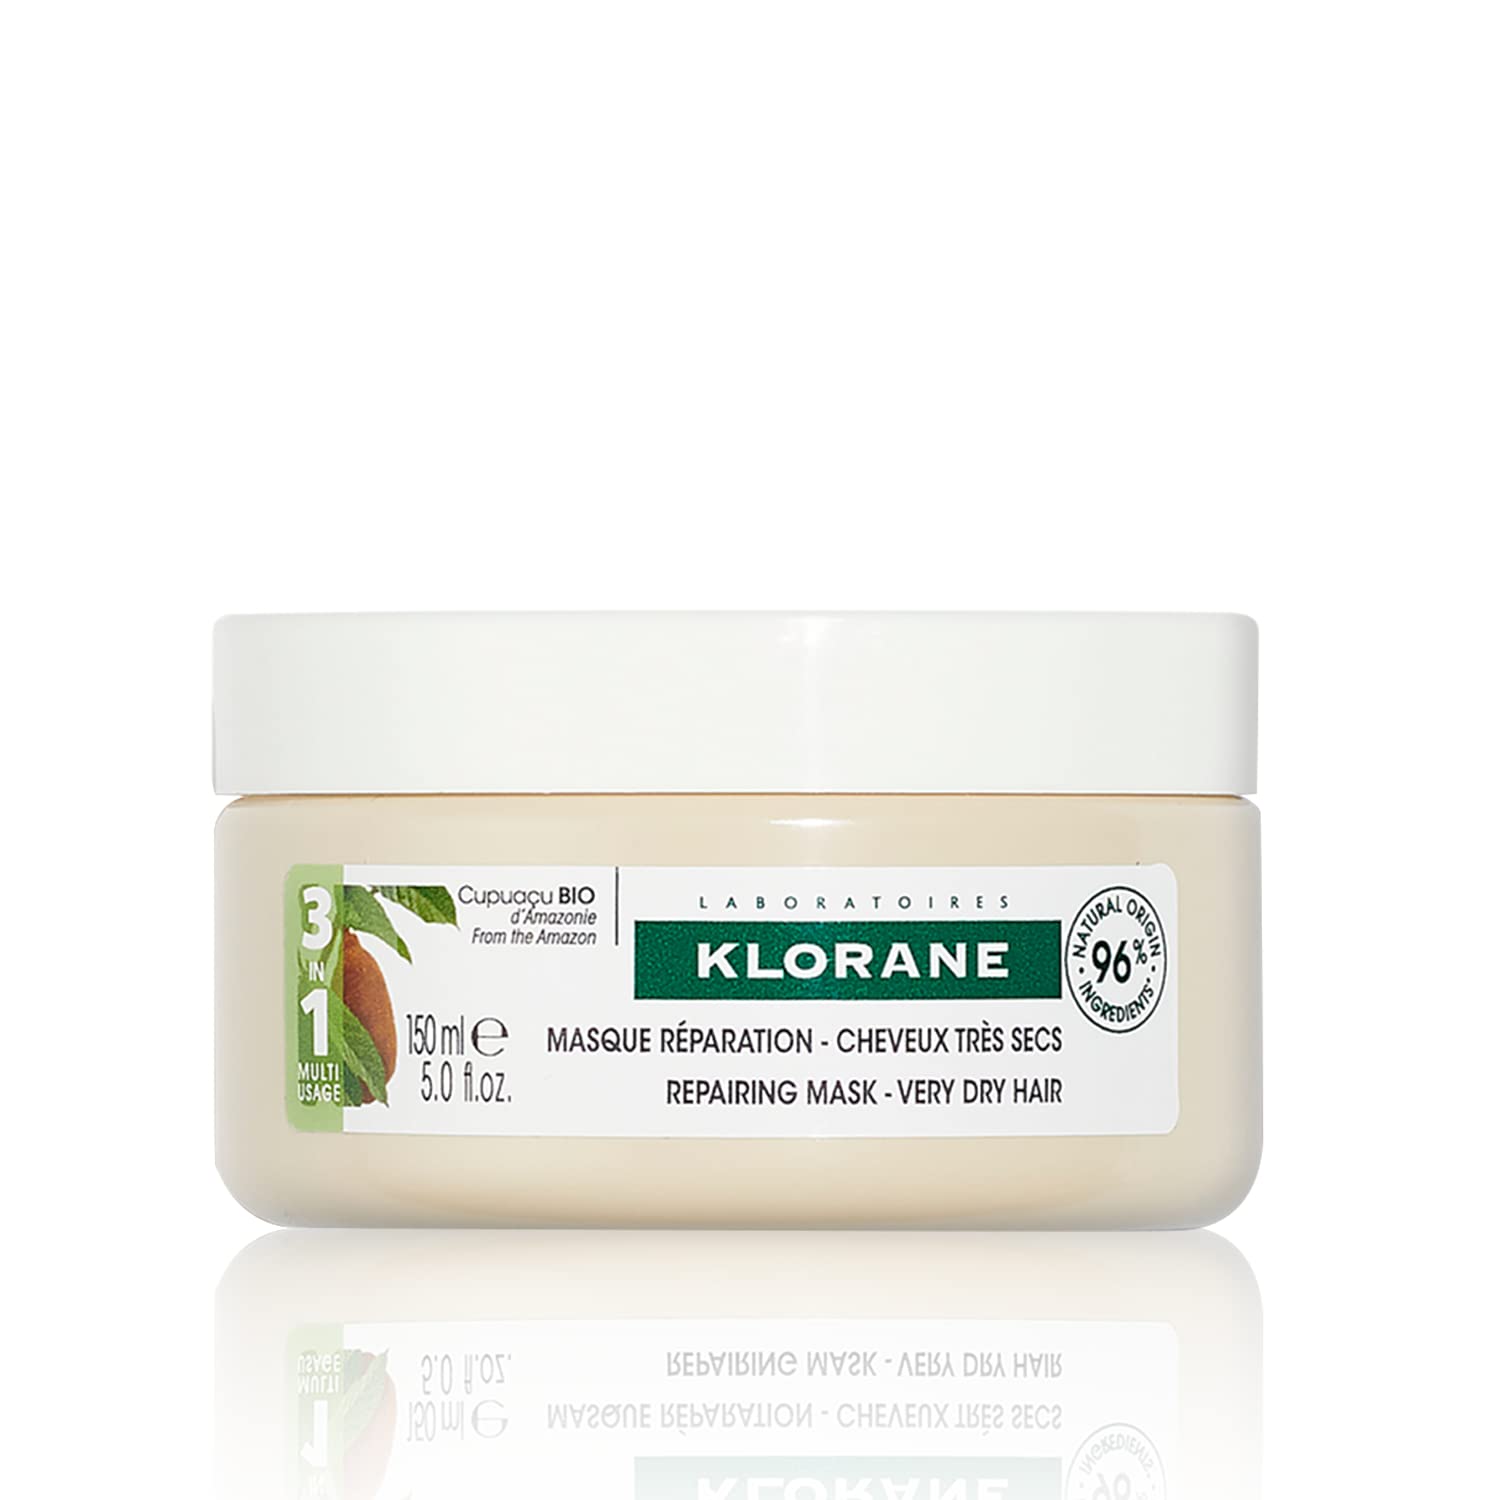 Klorane 3-in-1 Mask with Organic Cupuaçu Butter, Nourishing & Repairing for Very Dry Damaged Hair, Classic Mask, Overnight Mask, Leave-in Cream, SLS/SLES-Free, Biodegradable, 5 oz